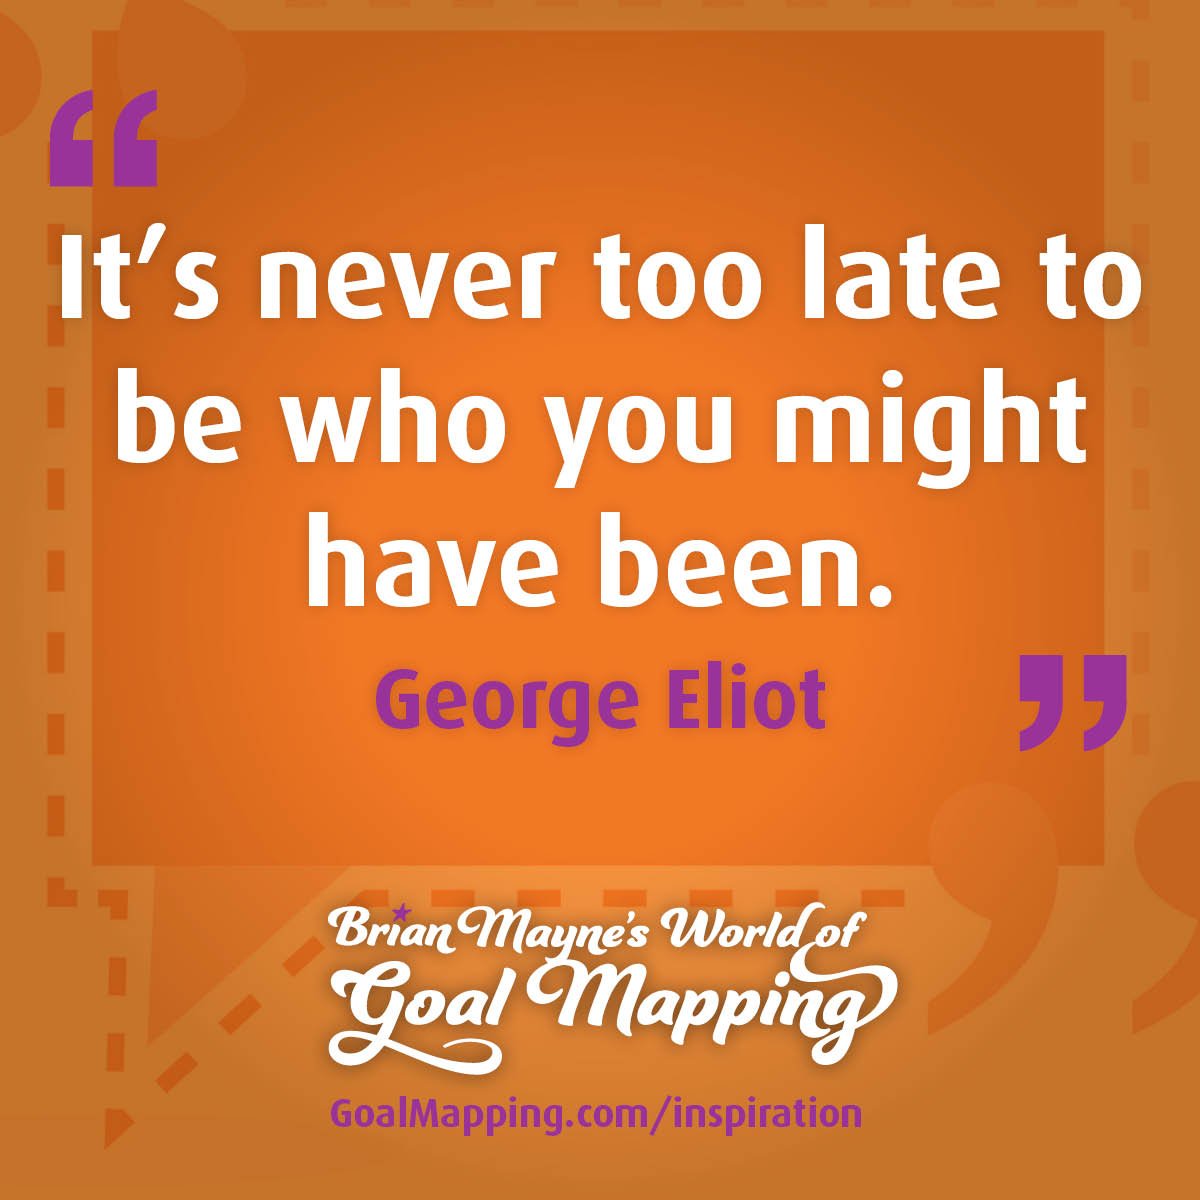 "It’s never too late to be who you might have been." George Eliot